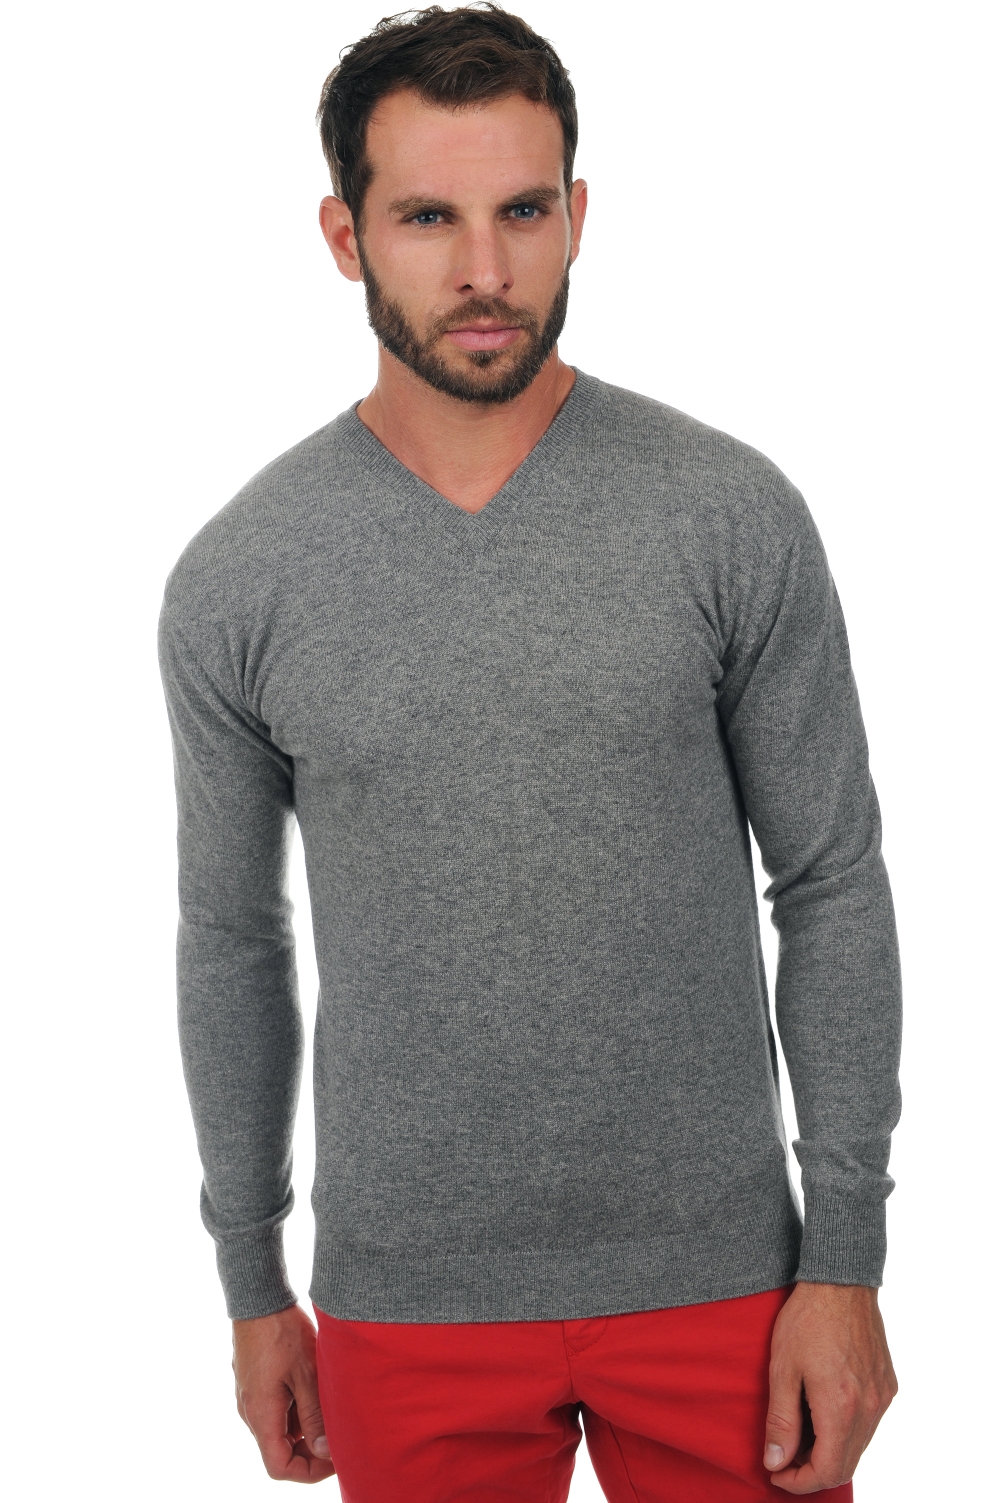 Cachemire pull homme maddox gris chine m